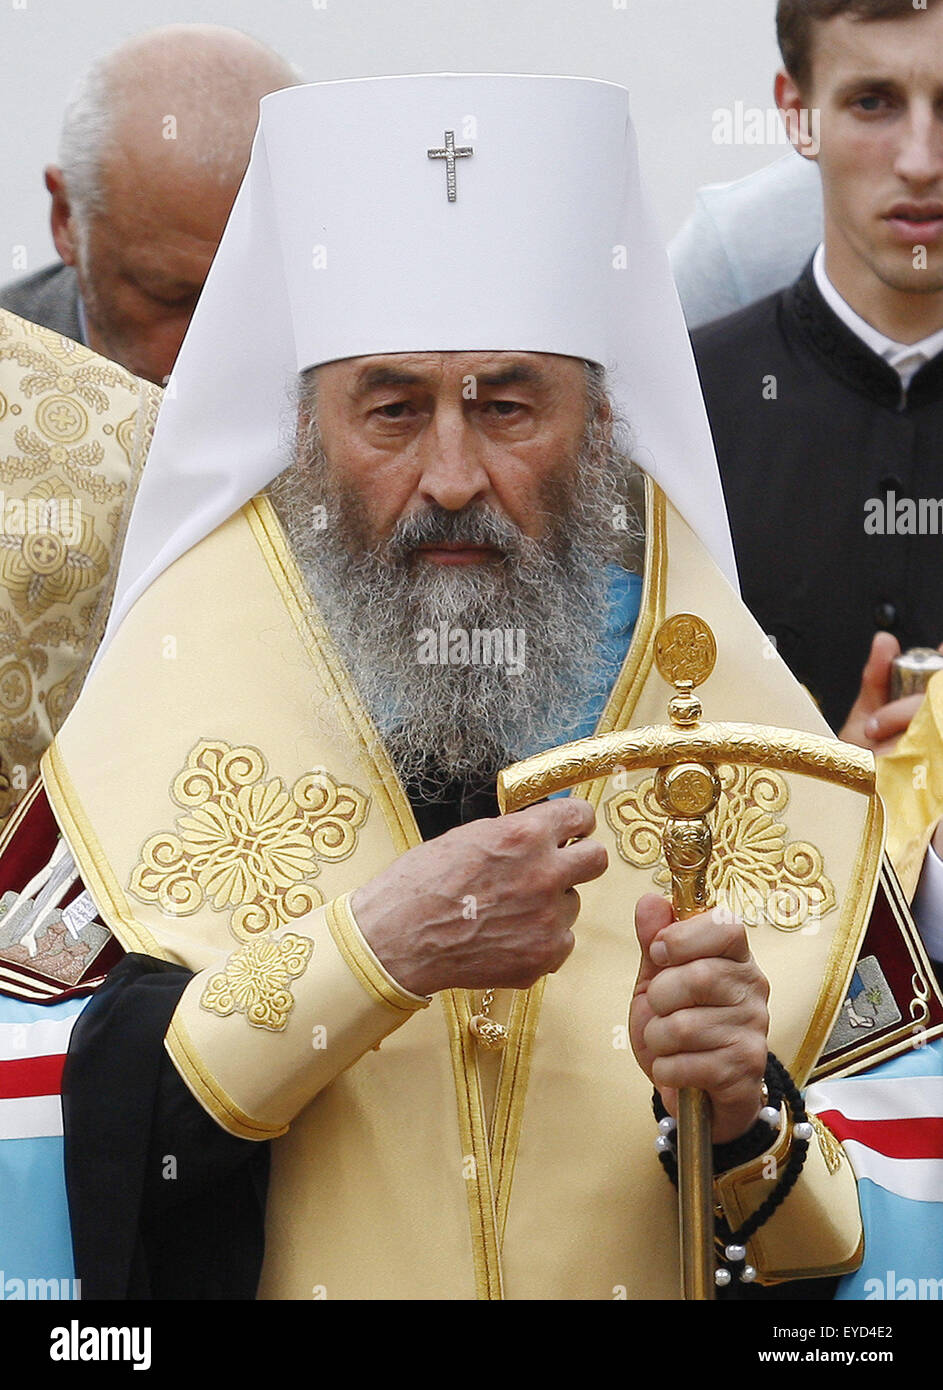 July 27, 2015 - Kiev, Ukraine - Metropolitan Onufry, head of the Ukrainian Orthodox Church of Moscow Patriarchate, participate in a prayer service marking the 1000th anniversary of the Repose of Vladimir the Great at St. Vladimirs Hill in Kiev, Ukraine, 27 July 2015. The Grand Prince of Kiev, Vladimir the Great, also known as St. Vladimir, Vladimir the Baptizer of Rus and Vladimir the Red Sun, was the first Christian ruler in the Kievan Rus who christianized the region. Orthodox believers will mark the 1027th anniversary of Kievan Rus Christianization on 28 July. (Credit Image: © Serg Glovny v Stock Photo